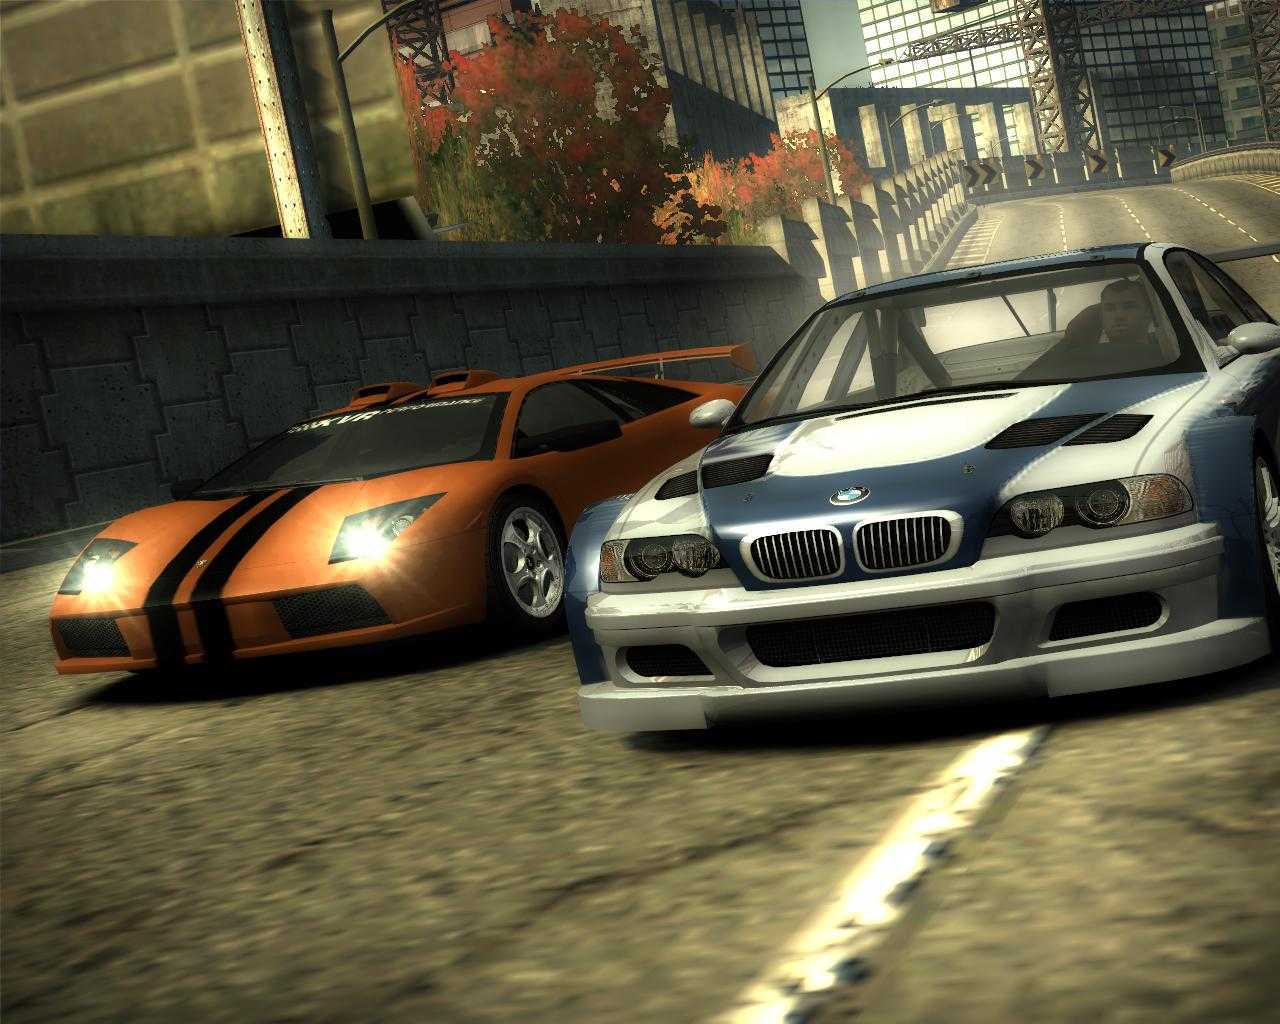 Игры nfs mw. Нид фор СПИД most wanted 2005. Нфс мост вантед 2005. Гонки NFS most wanted. Need for Speed MW 2005.